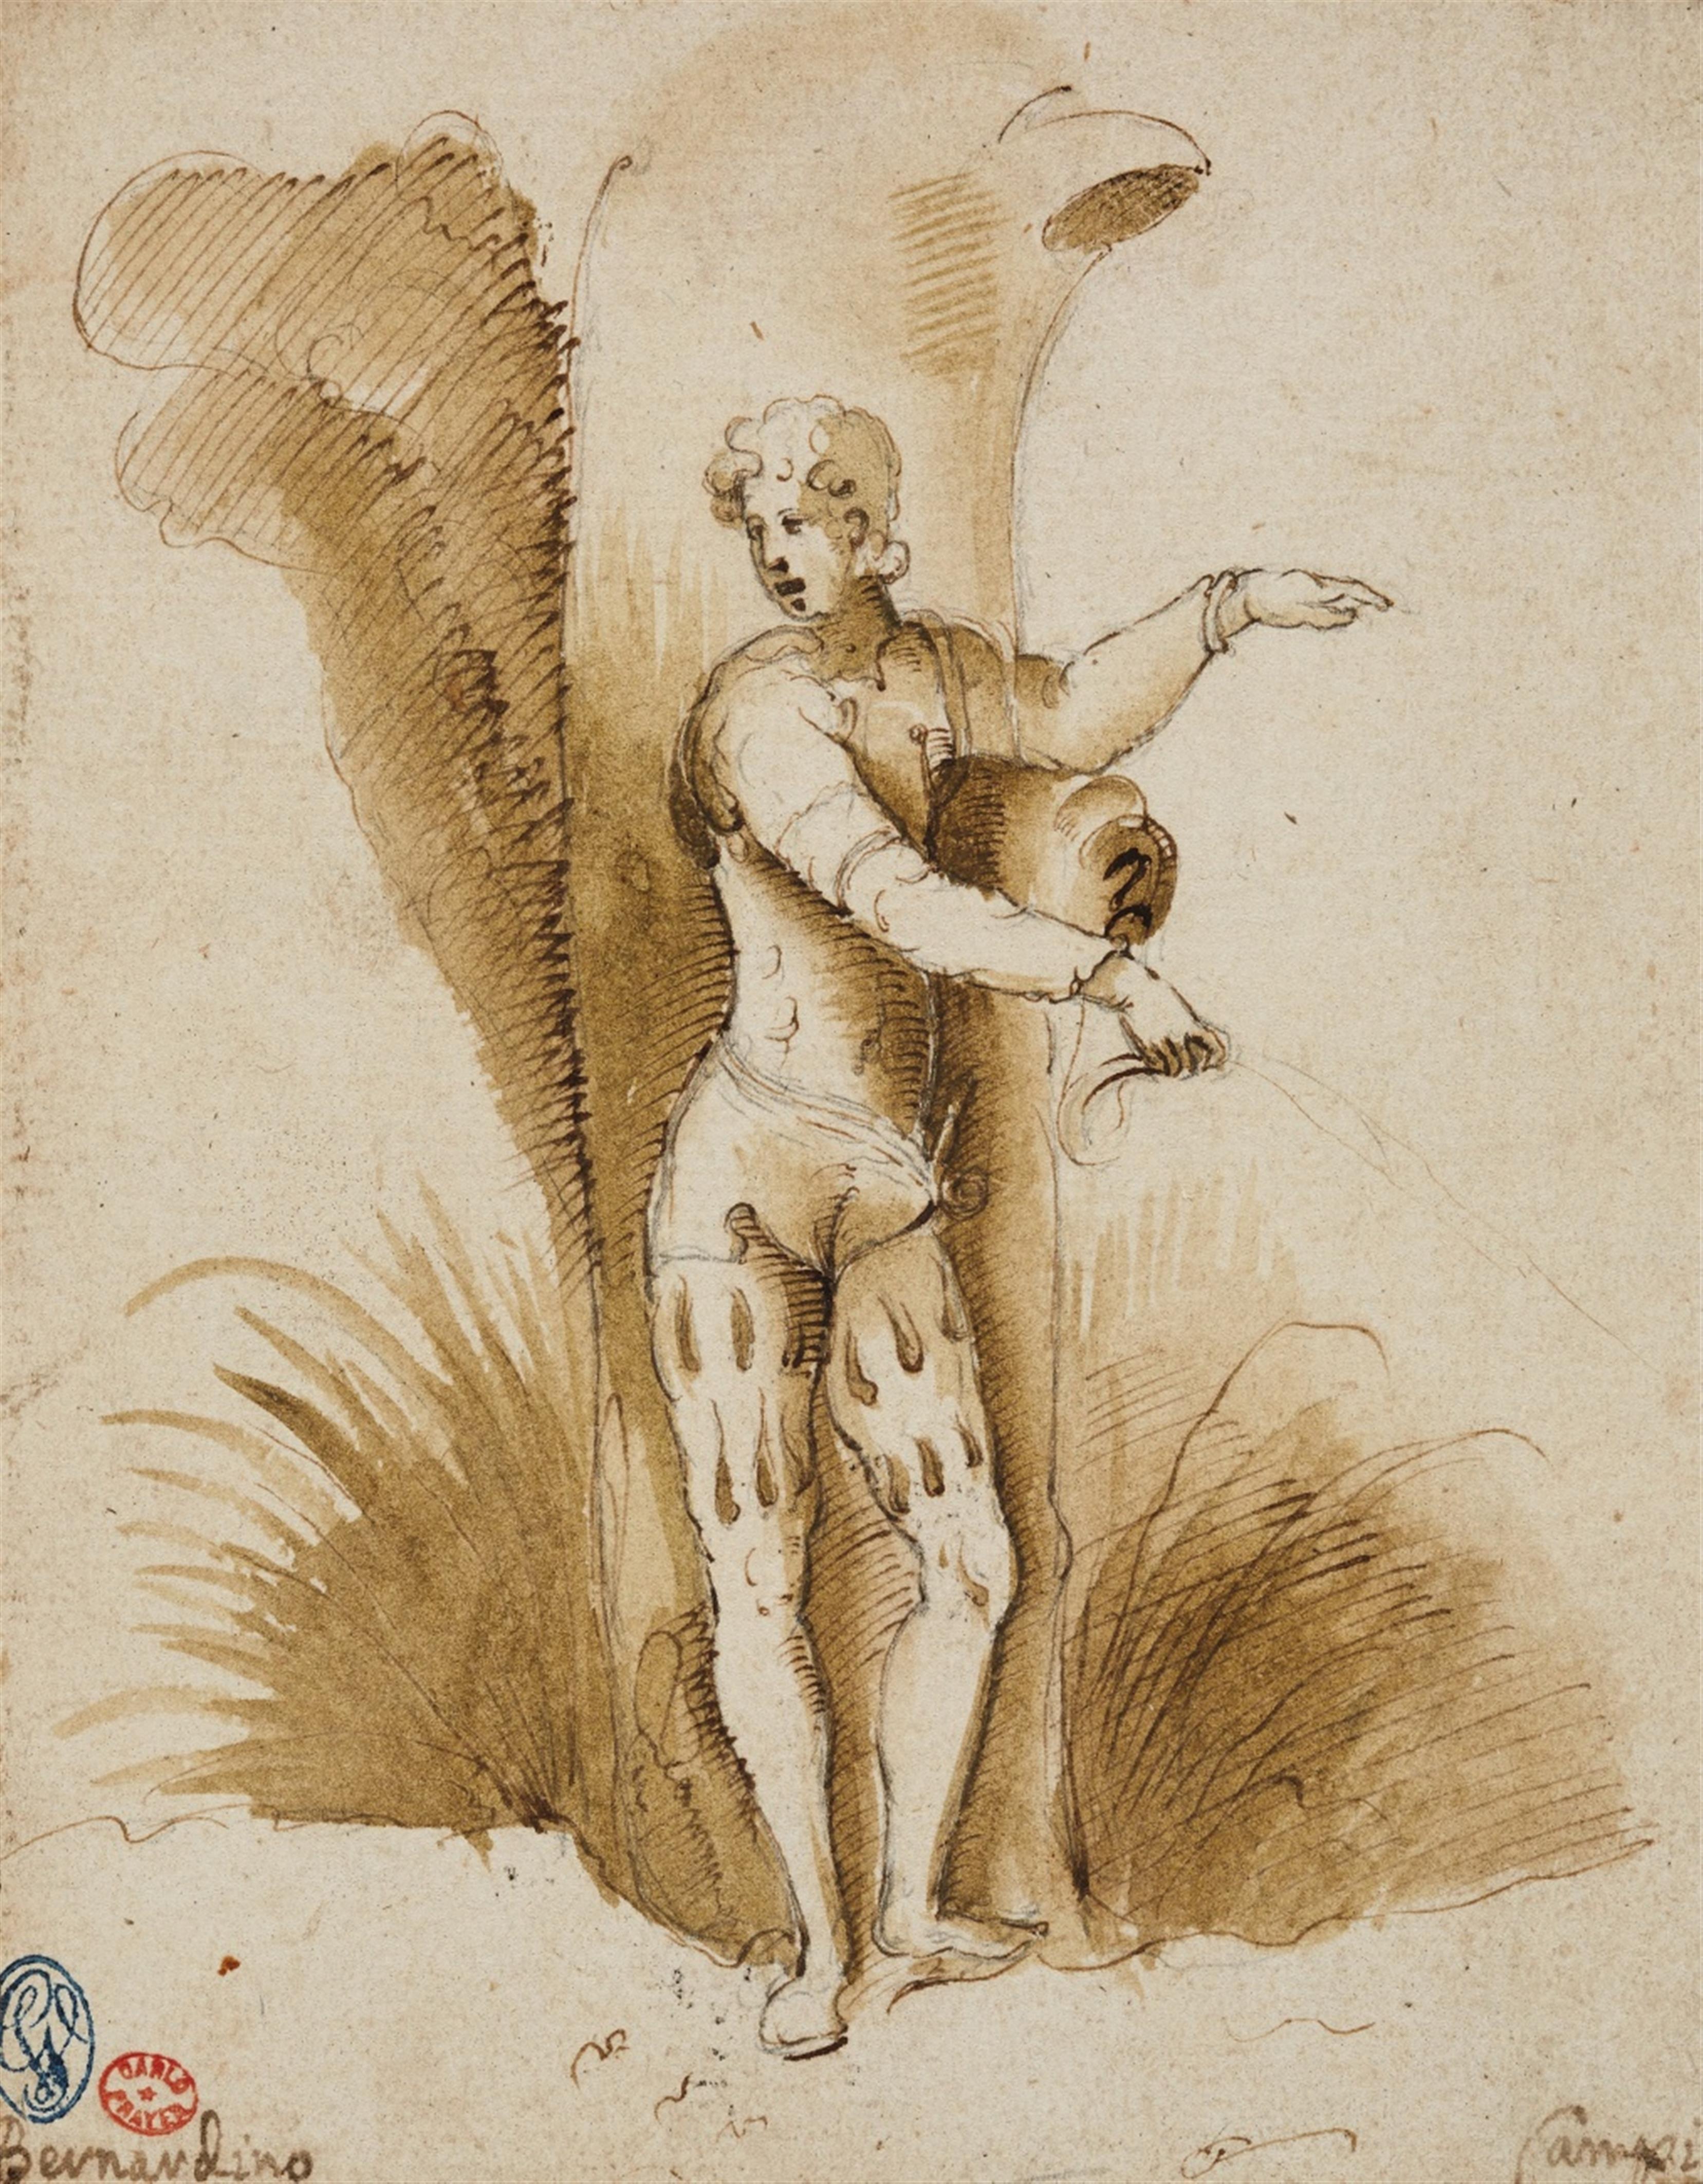 Bernardino Campi, attributed to - A Young Man Leaning on a Tree - image-1